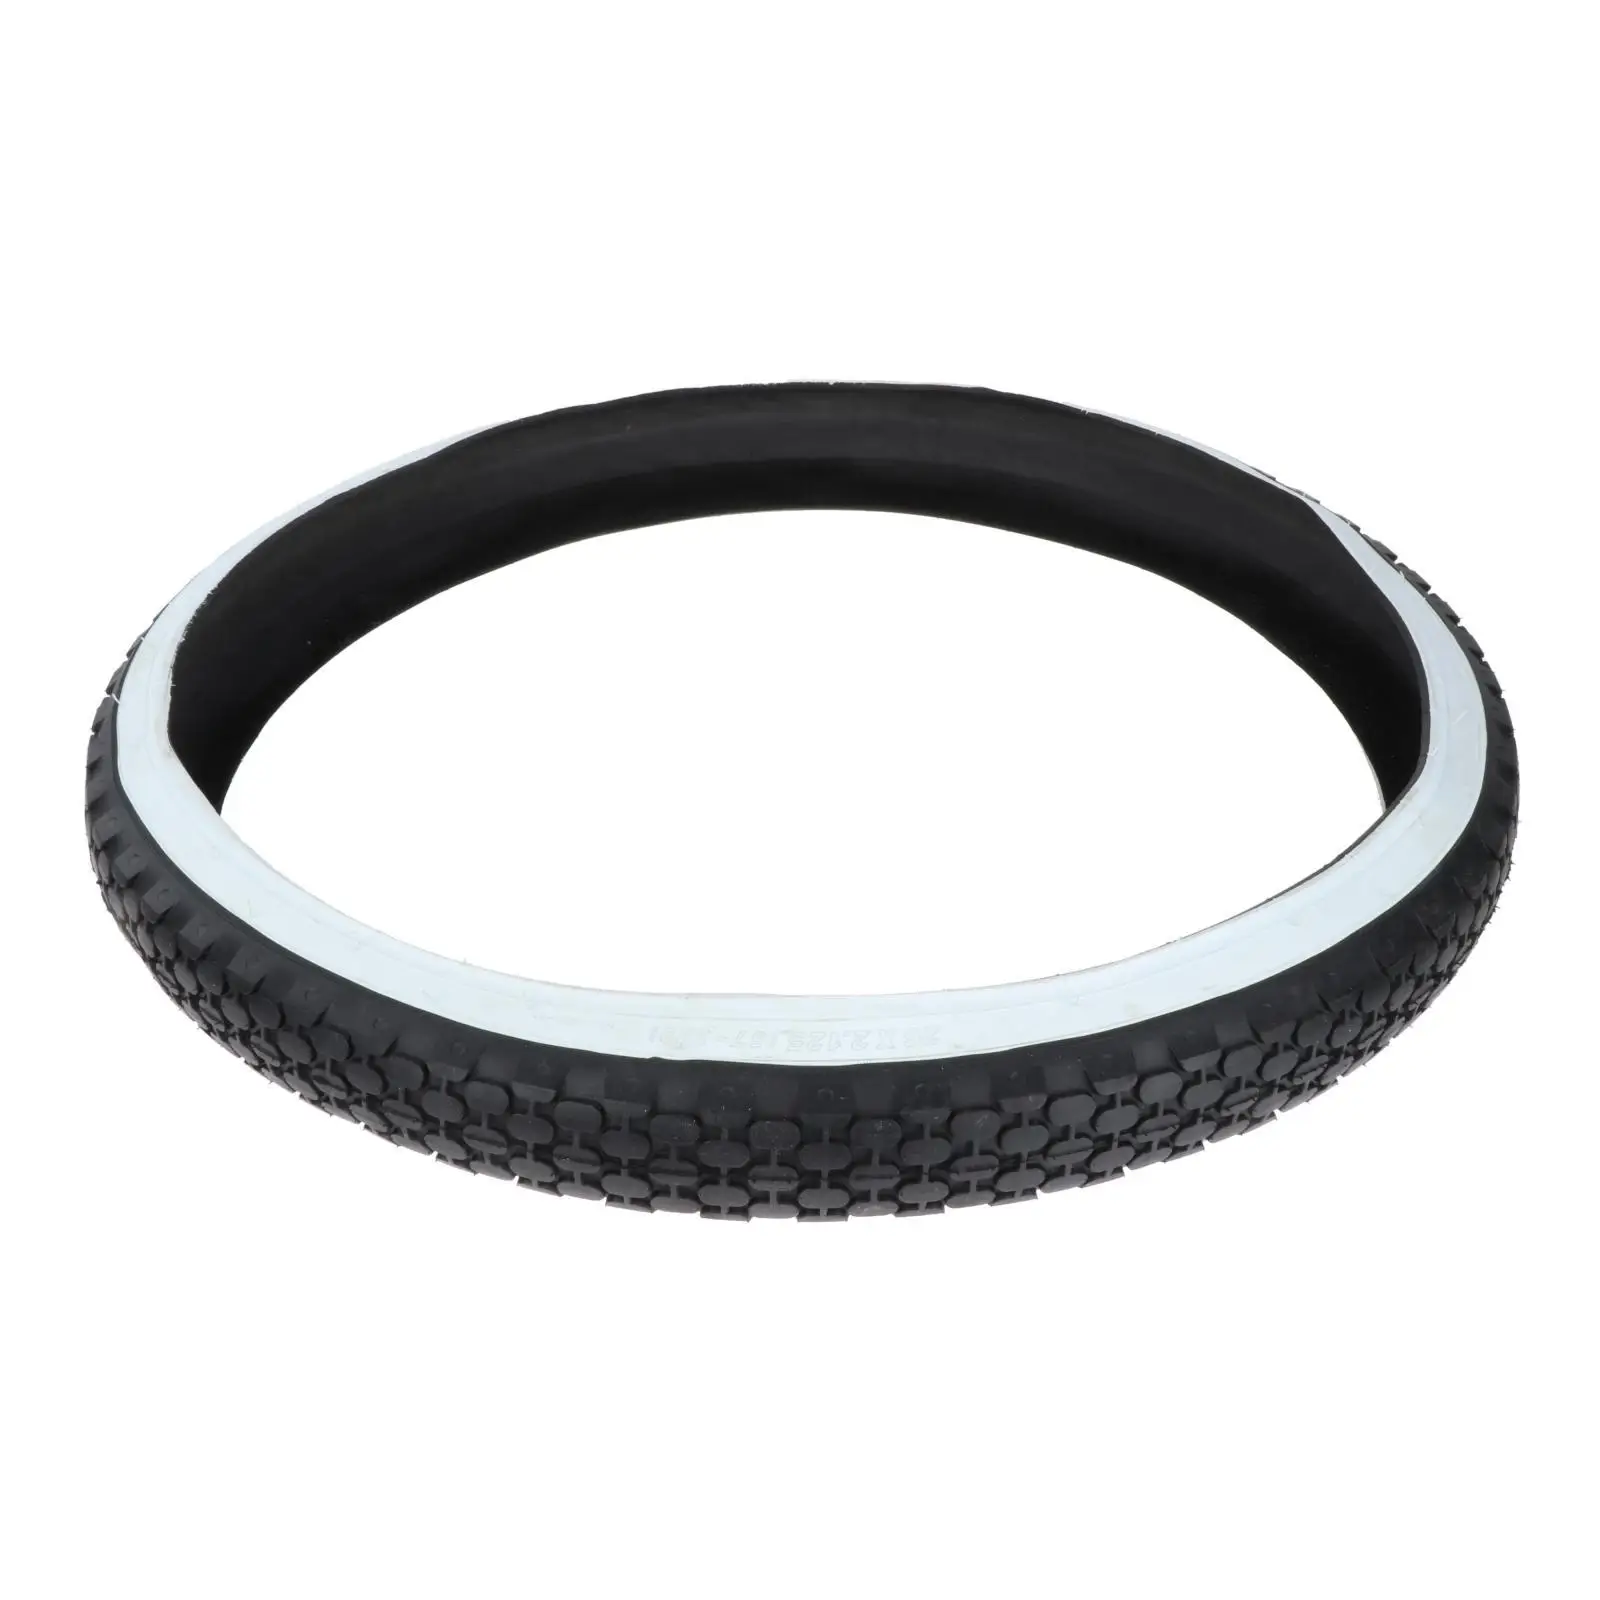 Road Bicycle Tyre 26x2.125 Durable Road Bike Wire Tires Cycling Parts More Grip Replaces for Mountain Bicycle Road Bike